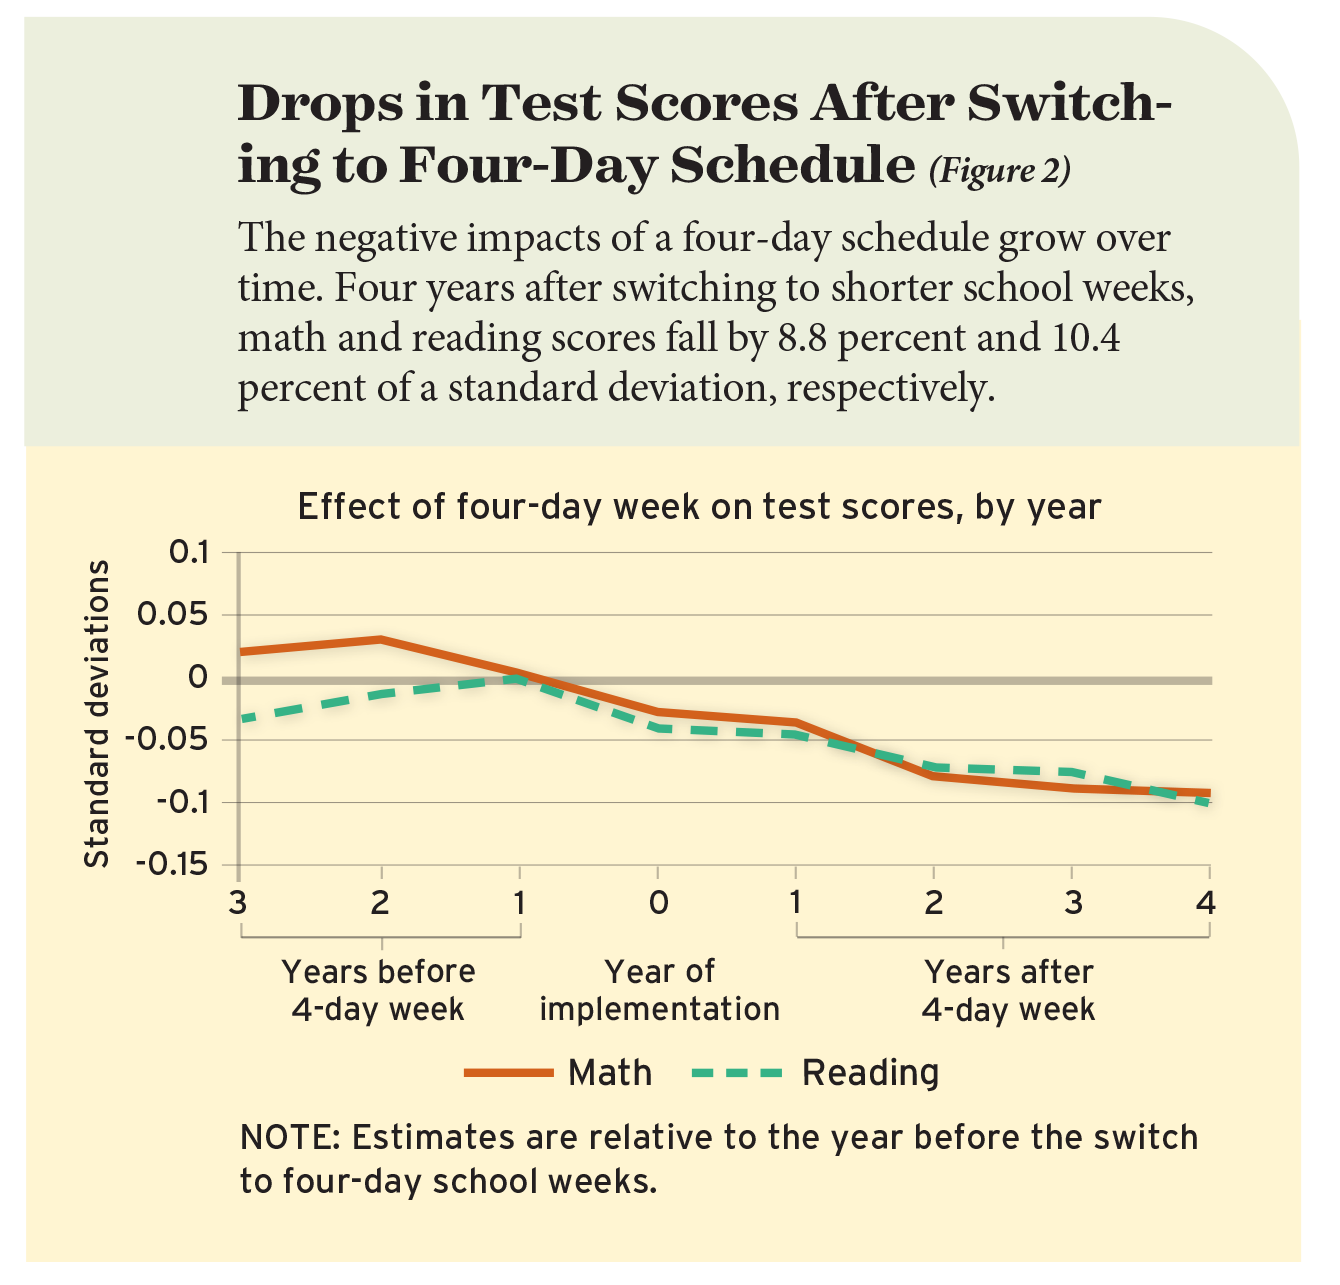 Figure 2: Drops in Test Scores After Switching to Four-Day Schedule